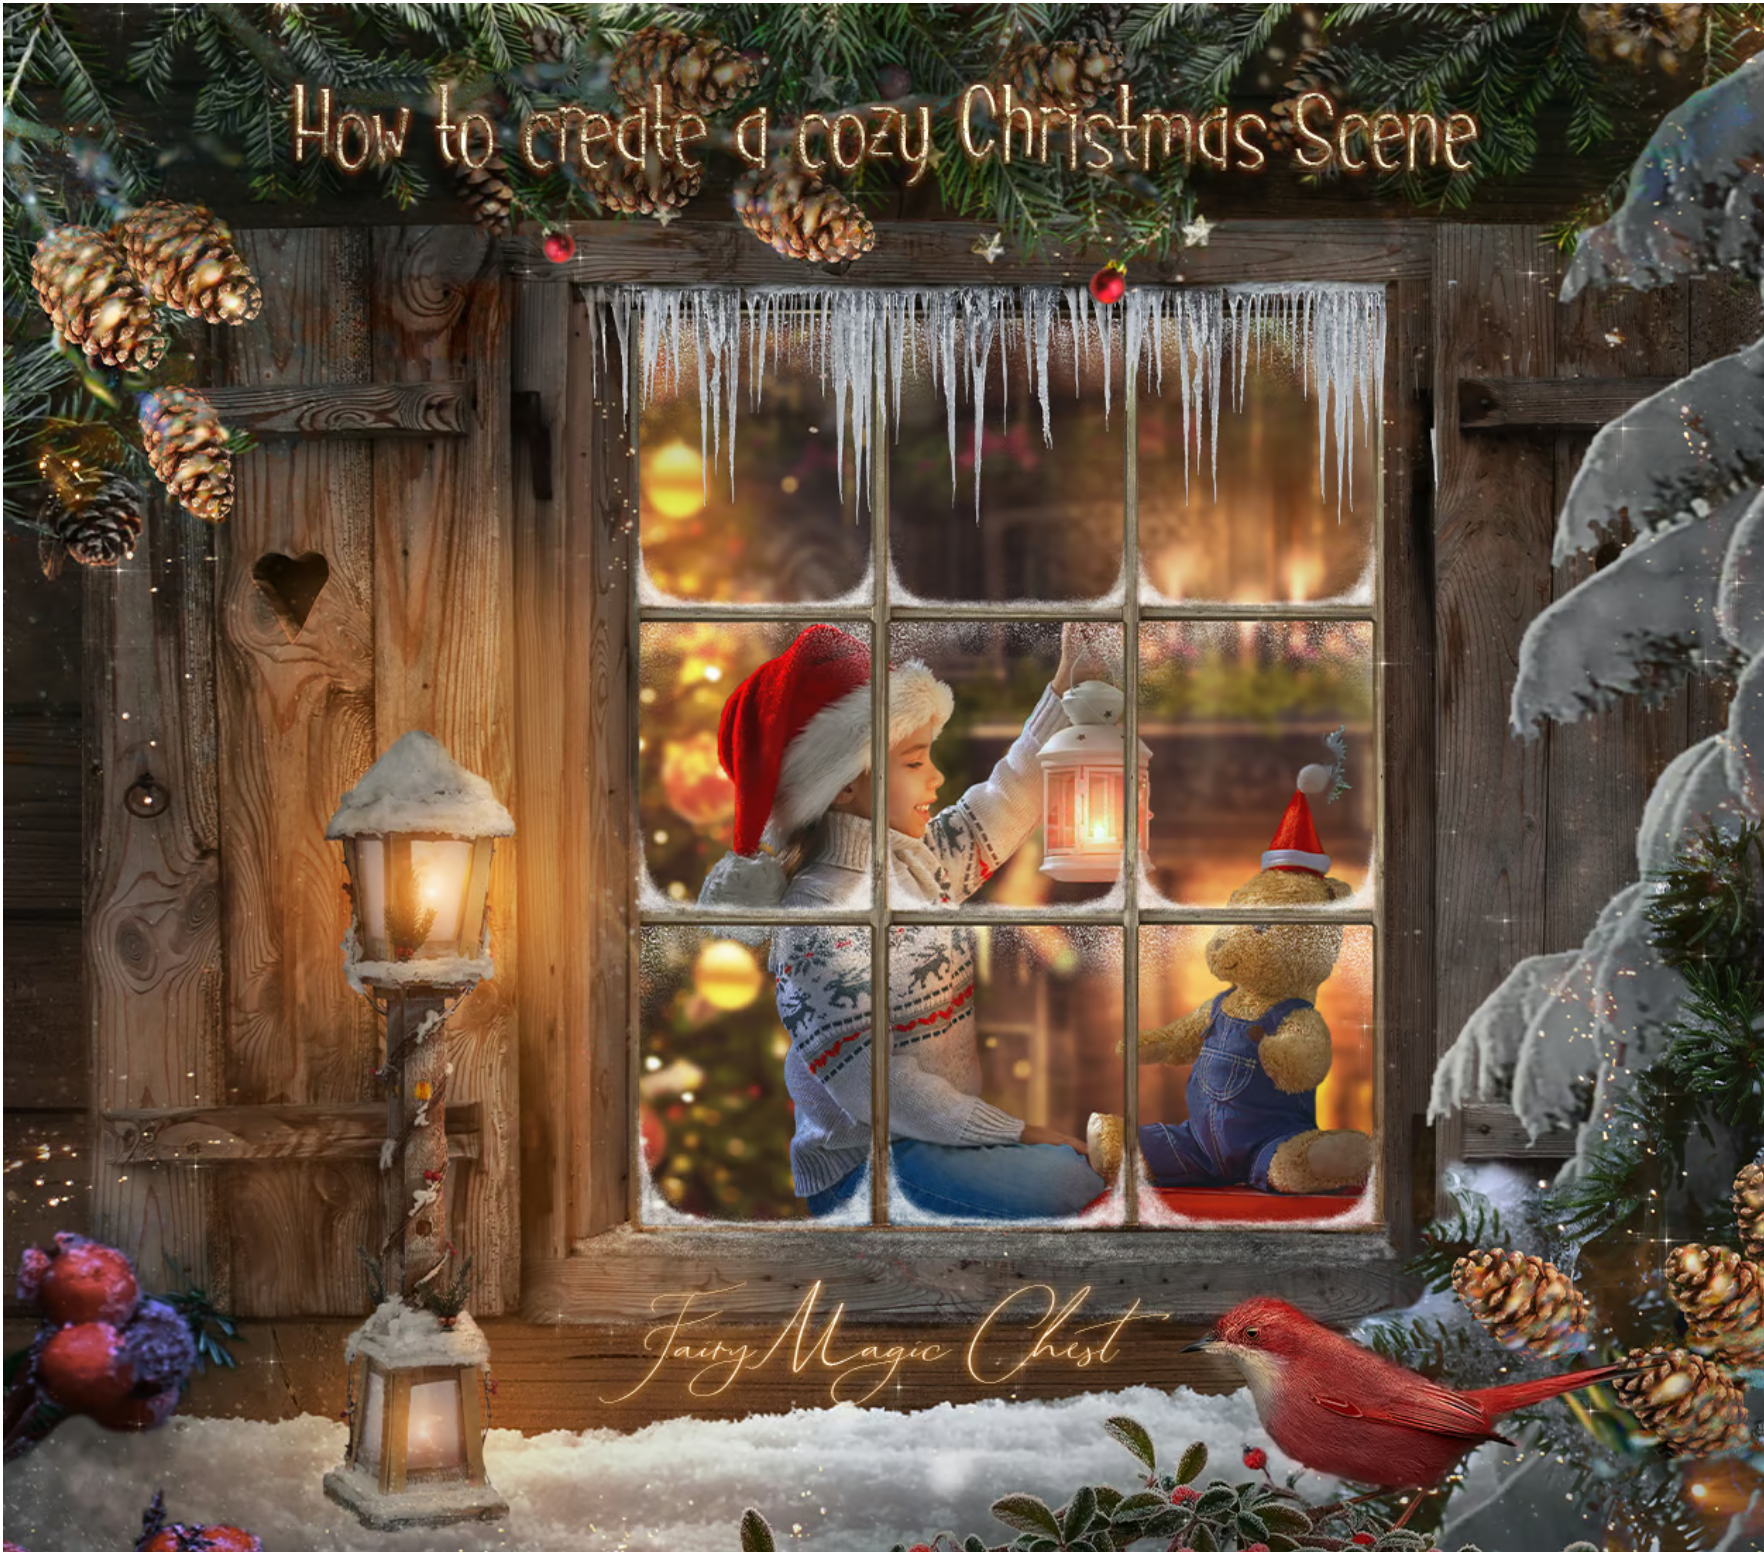 How to create a cozy Christmas scene in Photoshop. Easy!